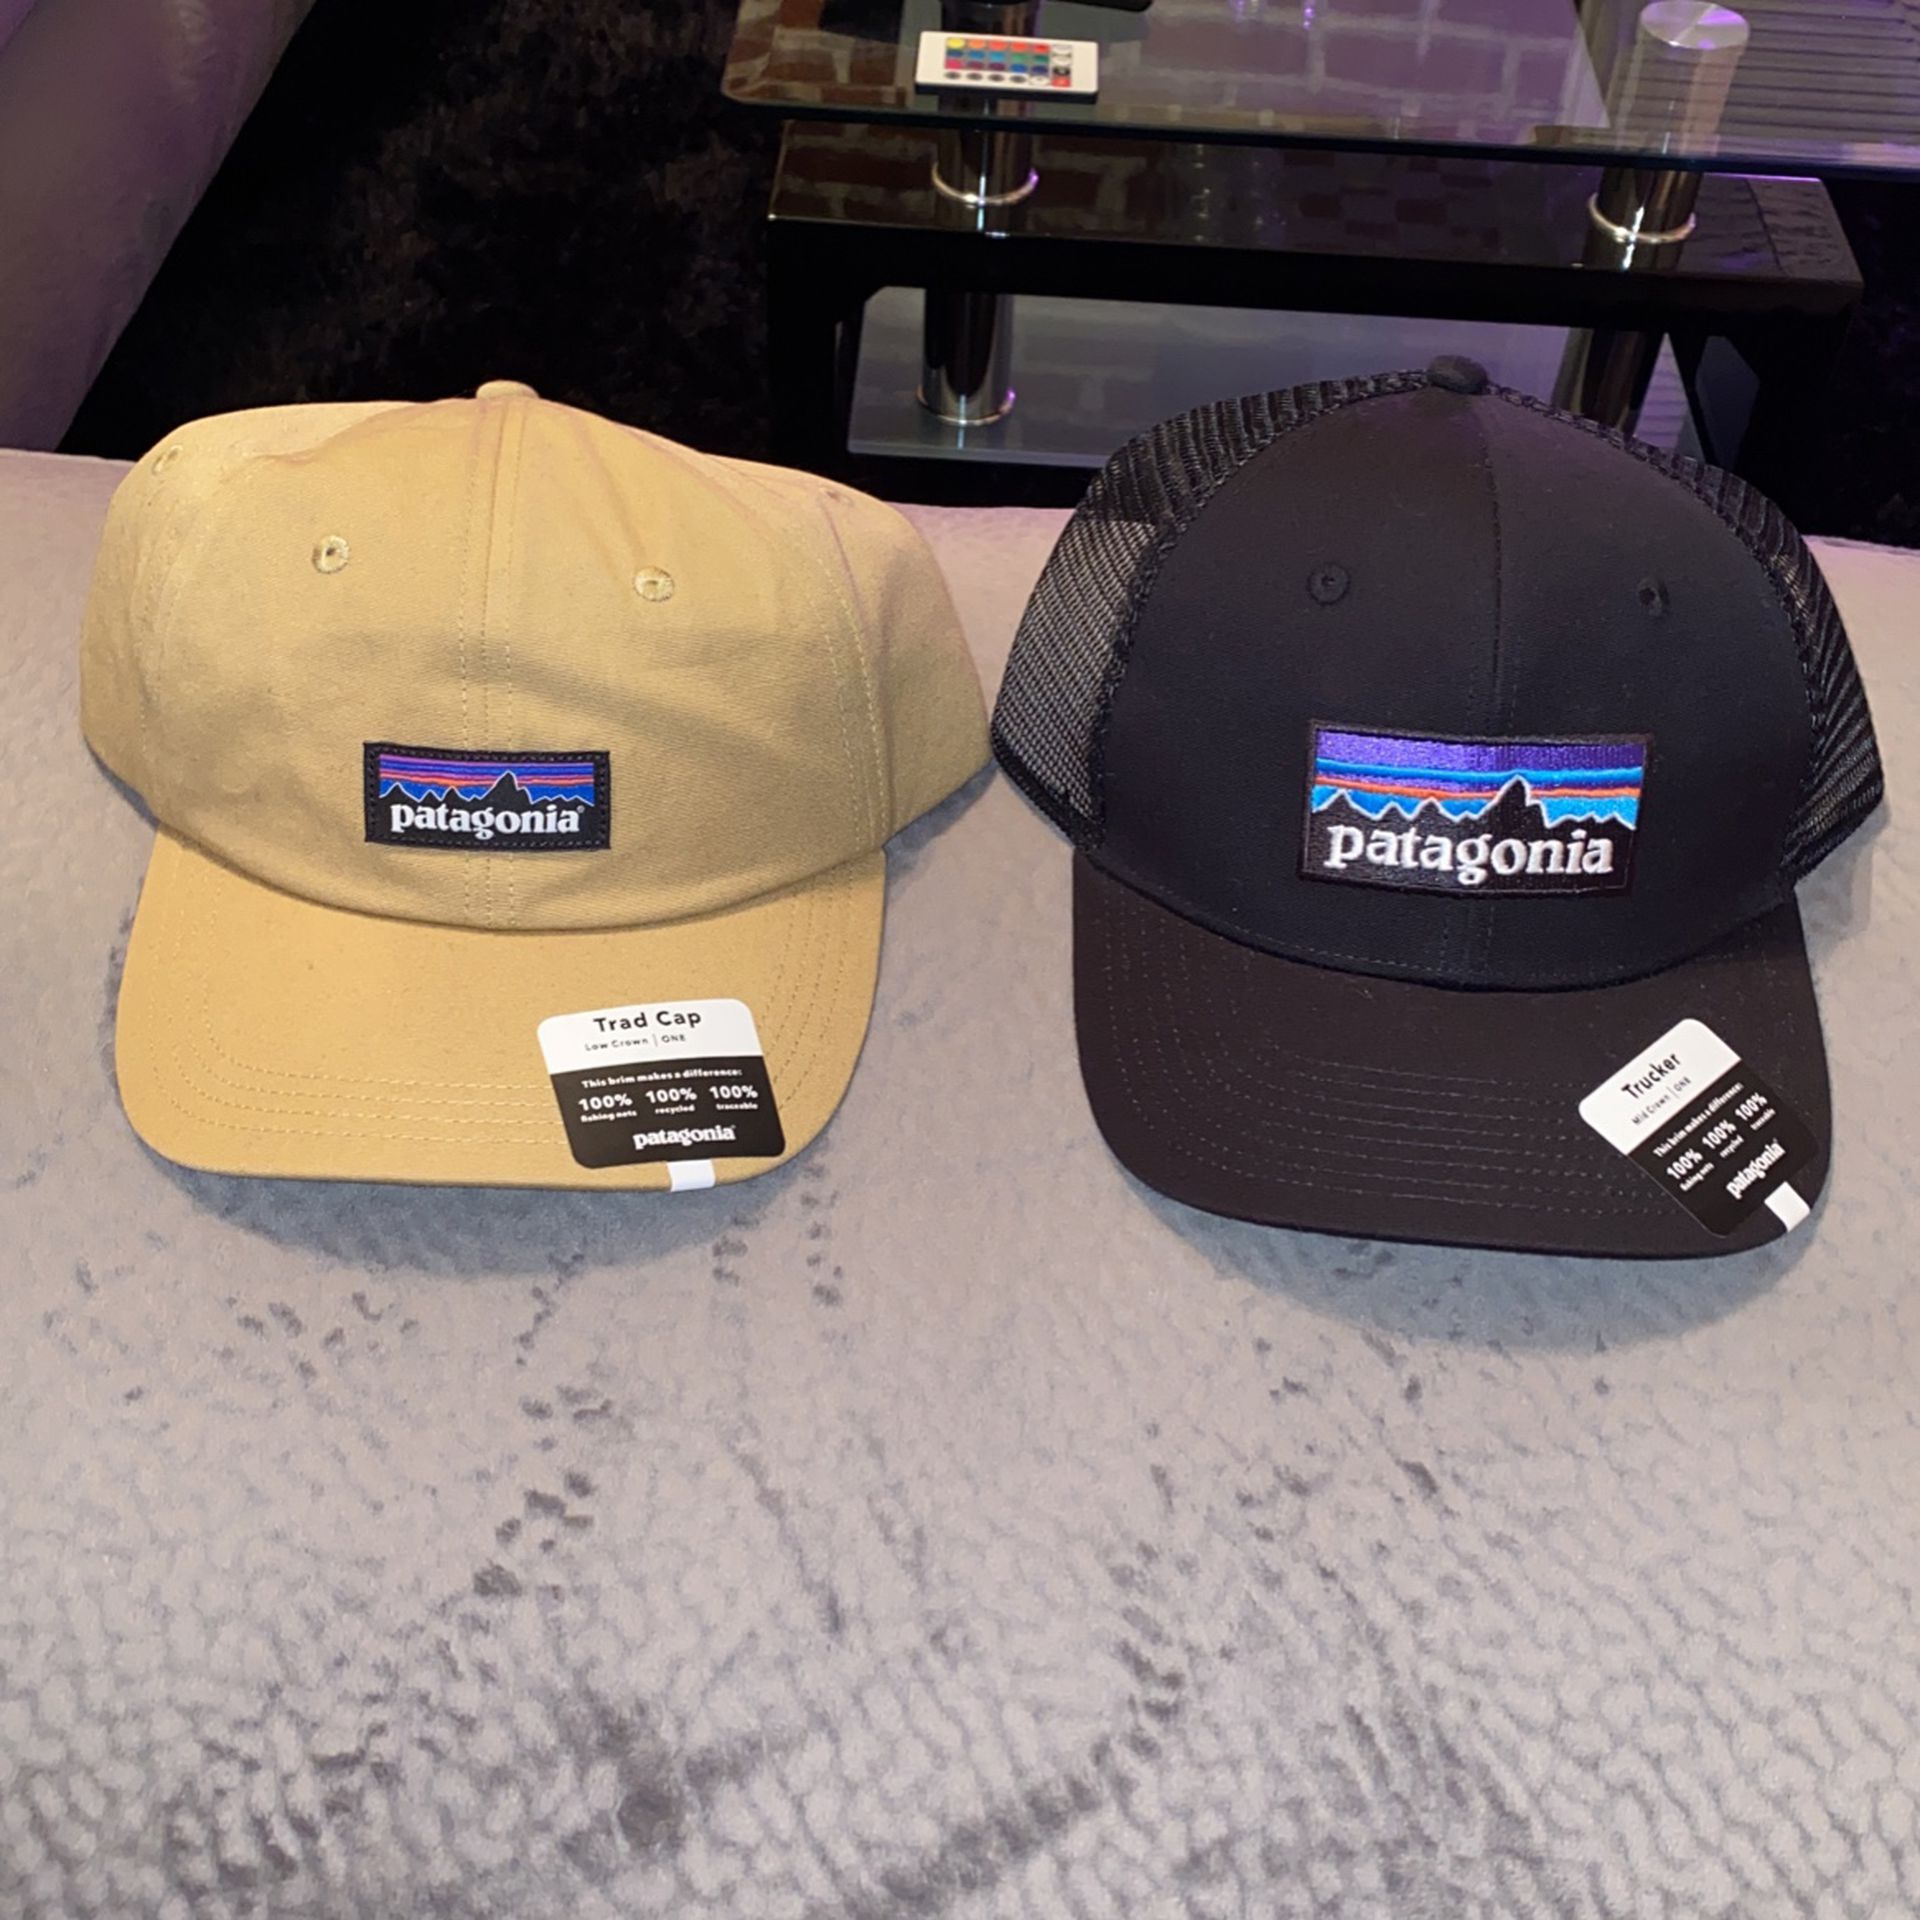 New Patagonia Hats 25$ Each